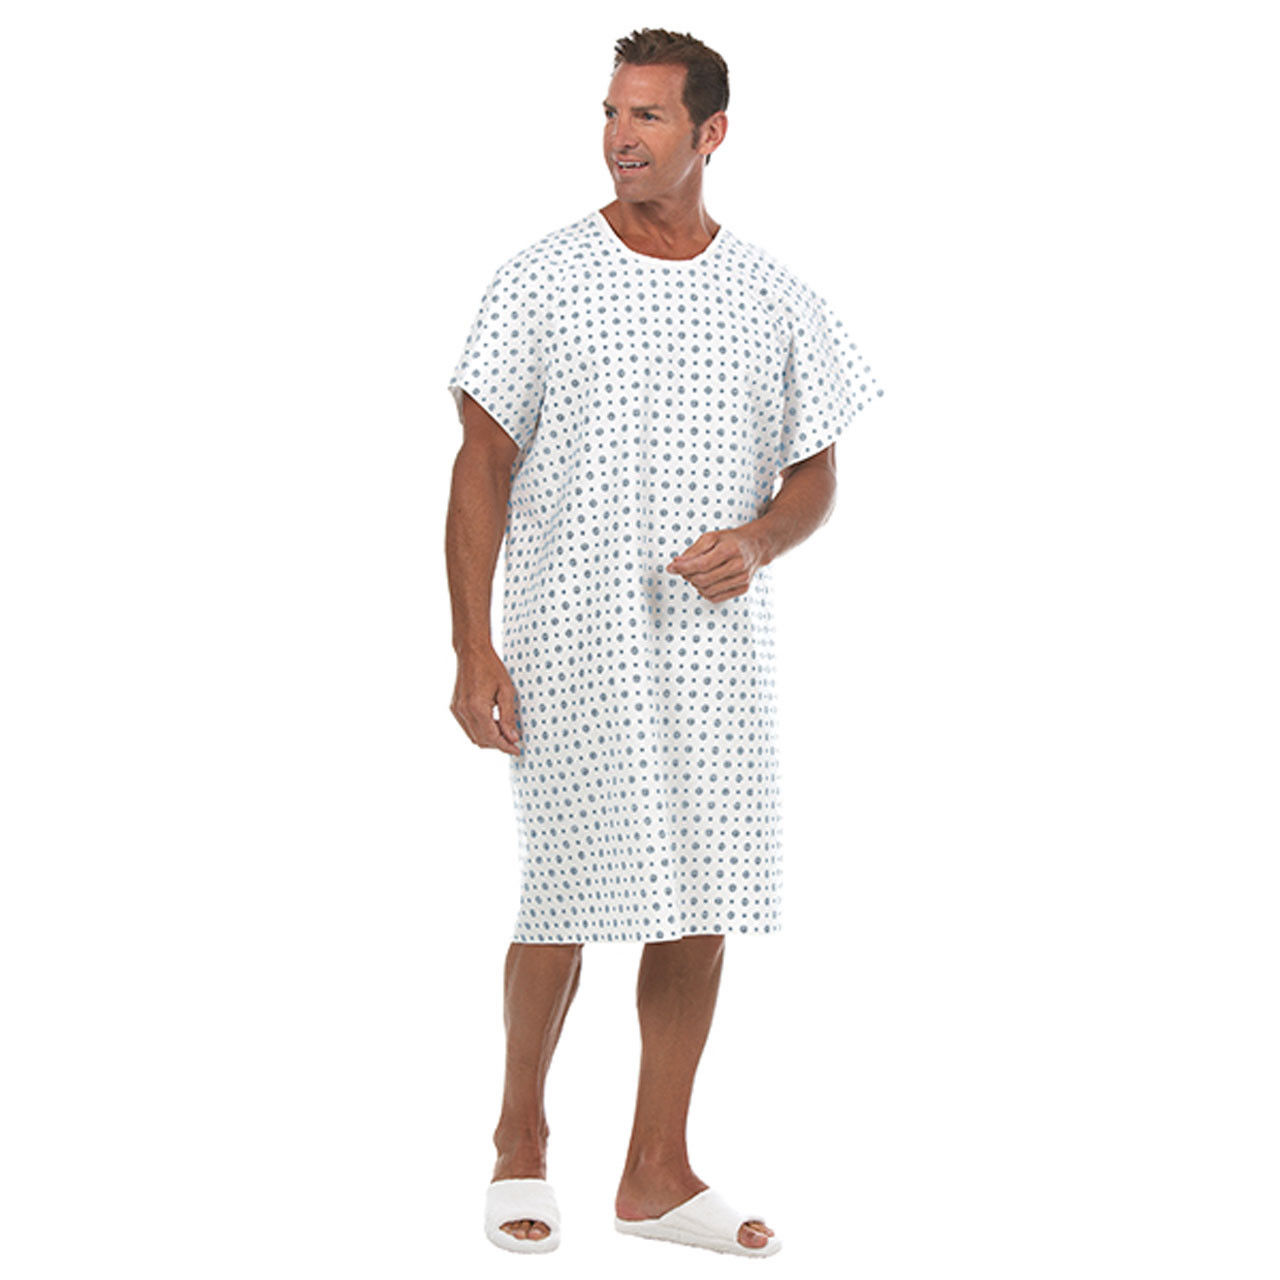 What is the sweep measurement of the bulk surgical gown?